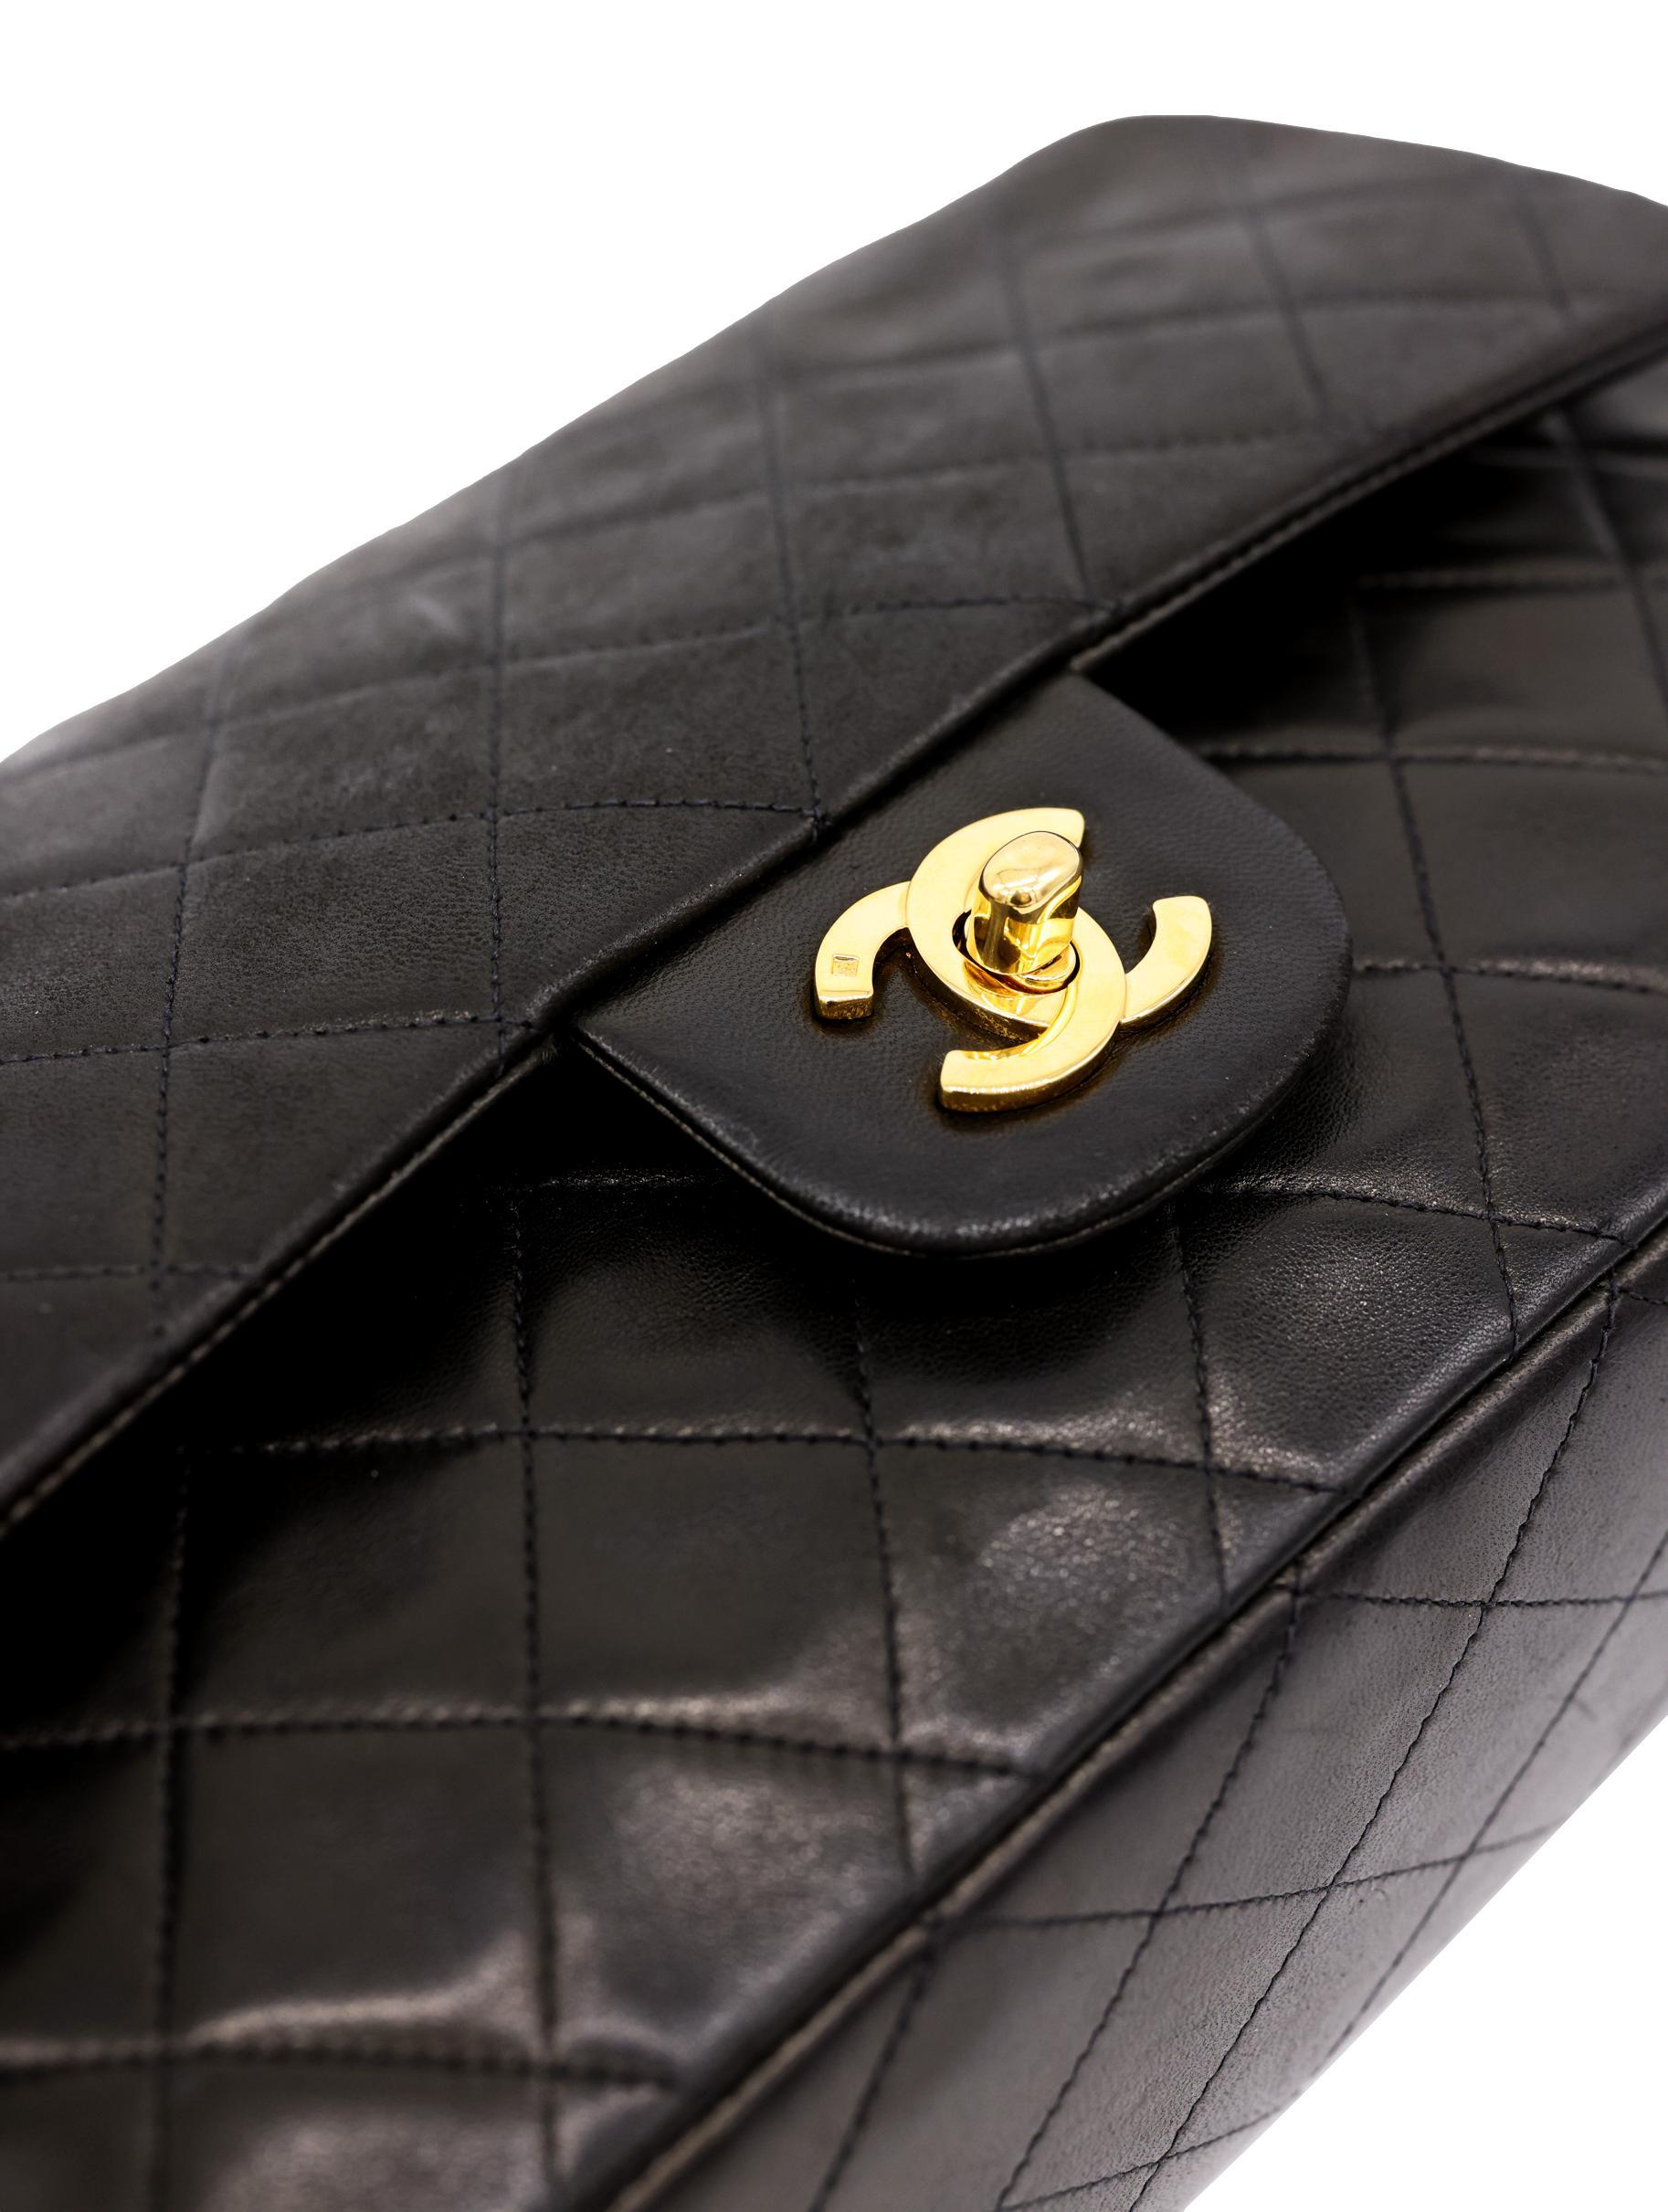 Chanel Timeless Black Medium Double Flap Quilted Lambskin Shoulder Bag, 2019. 9